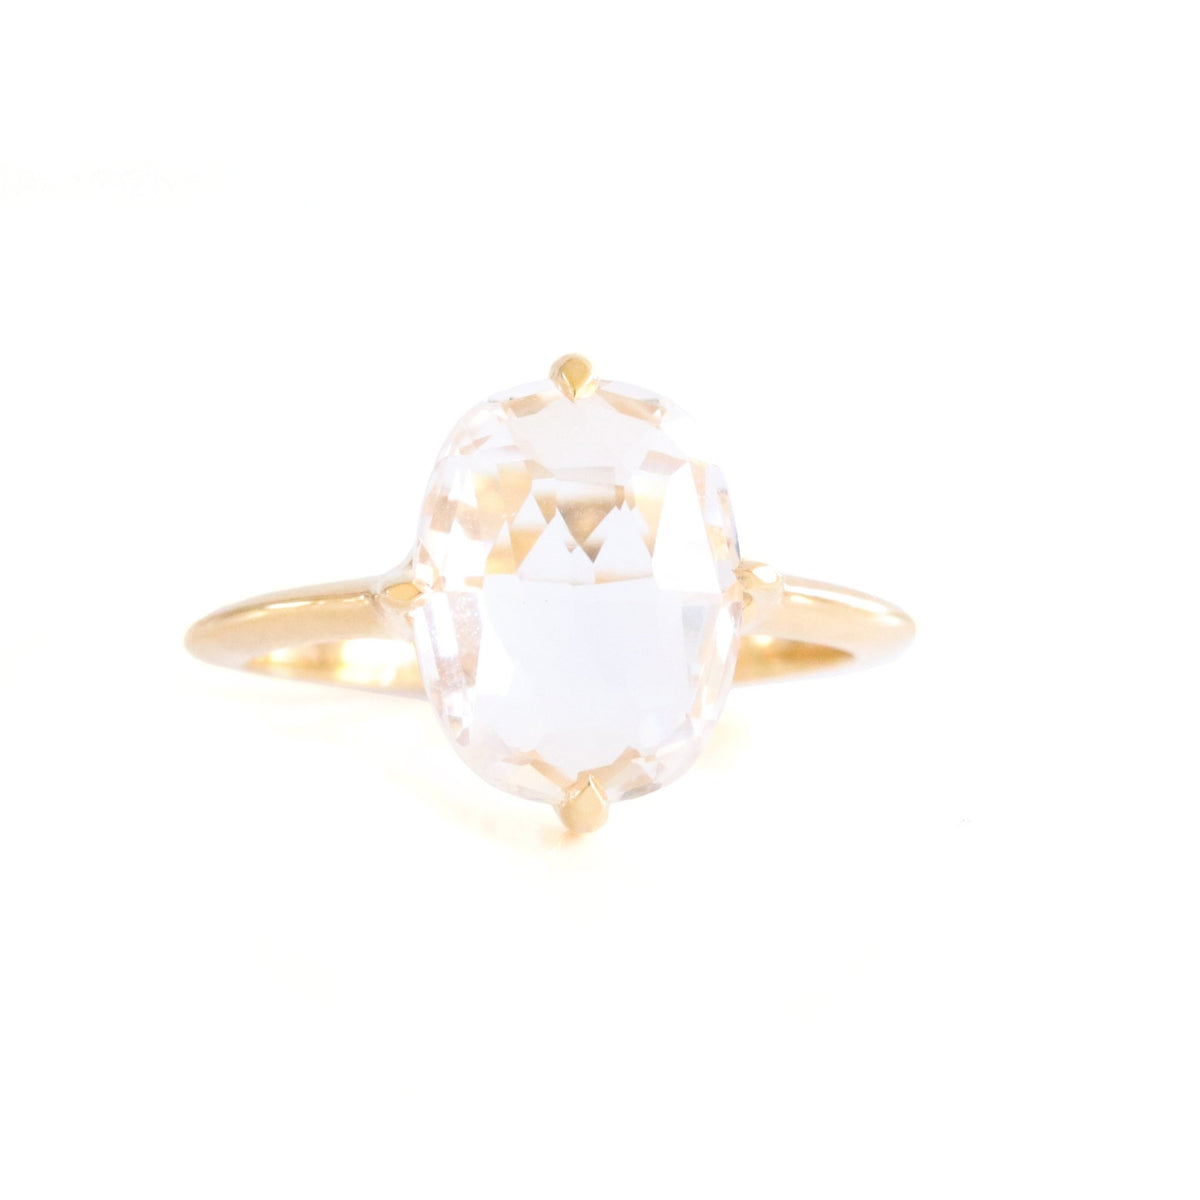 KIND OVAL SOLITAIRE RING - WHITE TOPAZ &amp; GOLD - SO PRETTY CARA COTTER